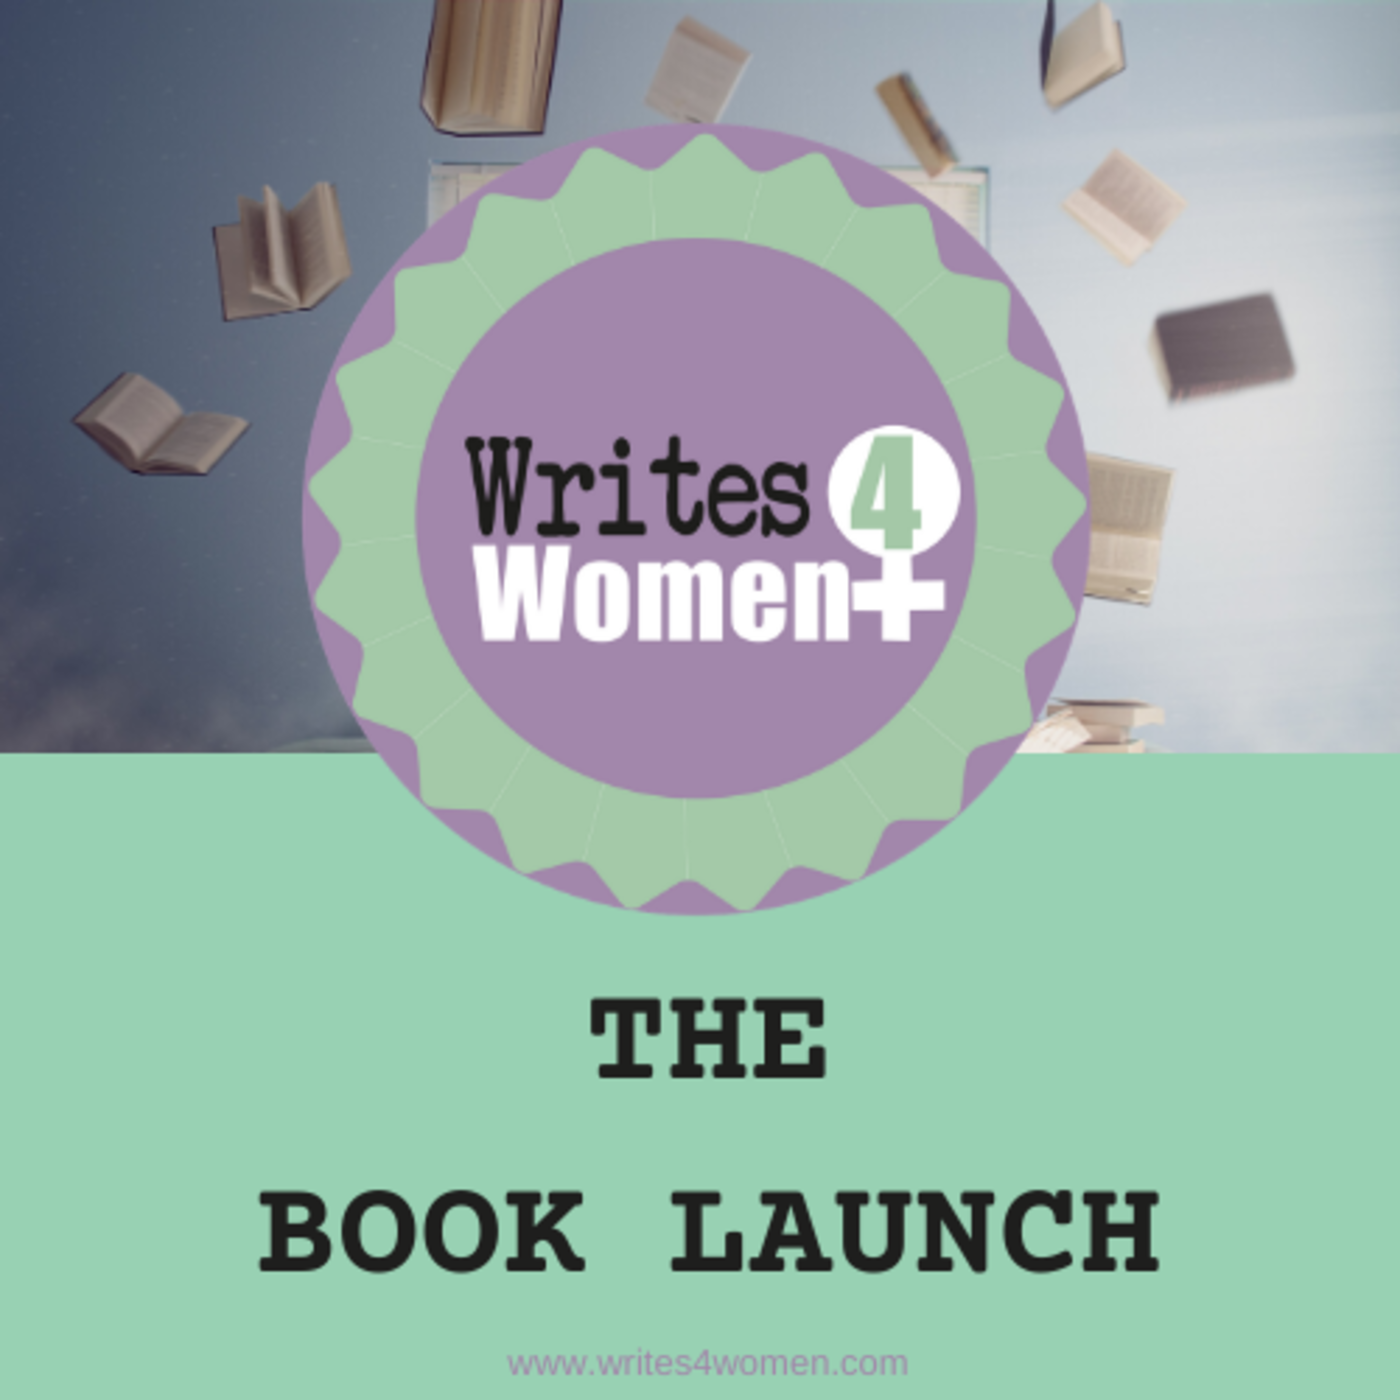 W4W BOOK LAUNCH - Vanessa Carnevale "My Life For Yours"